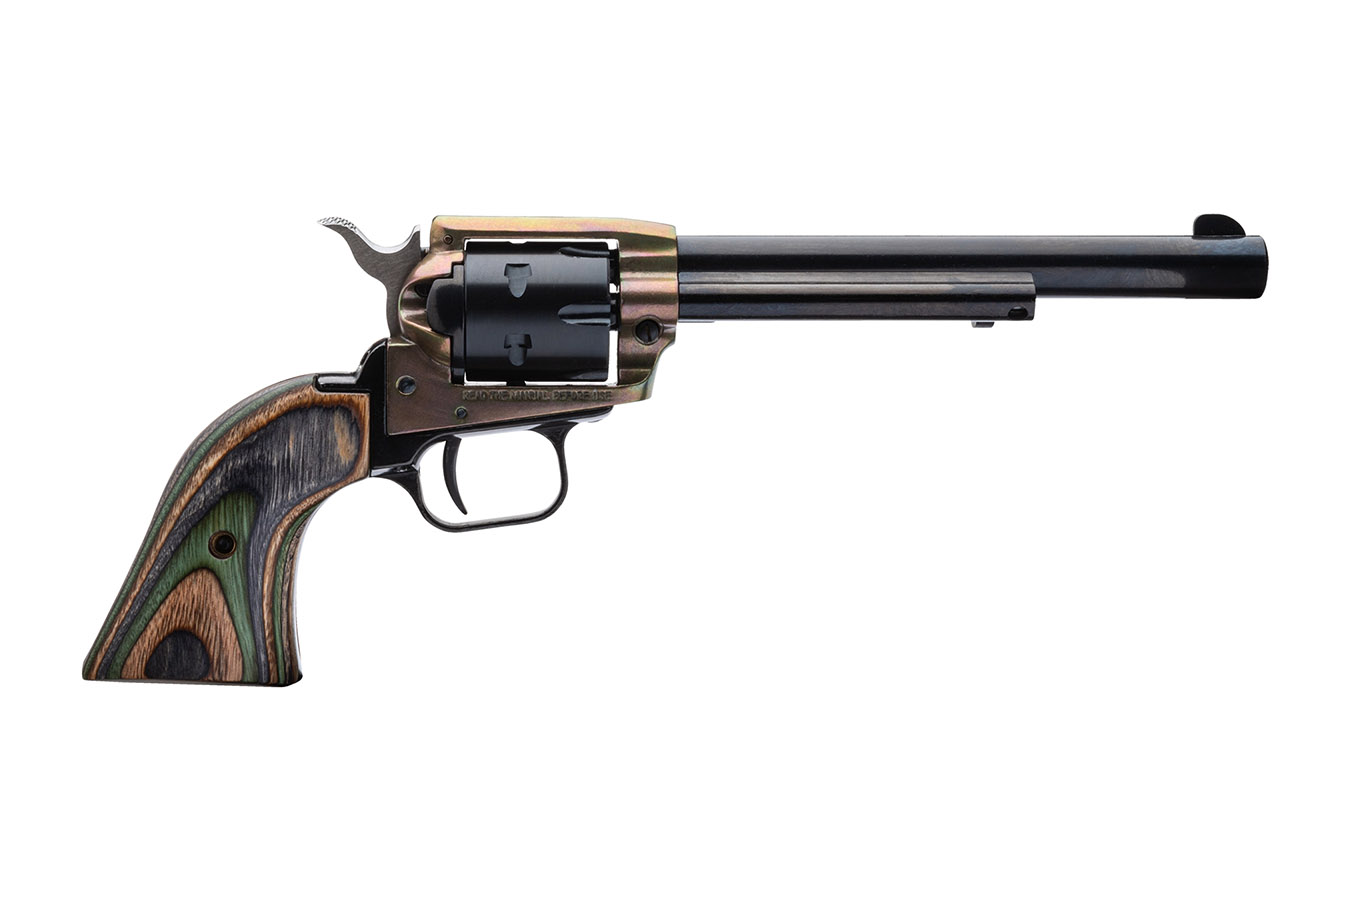 No. 7 Best Selling: HERITAGE ROUGH RIDER .22CAL 6 SHOT REVOLVER WITH CAMO WOOD GRIP